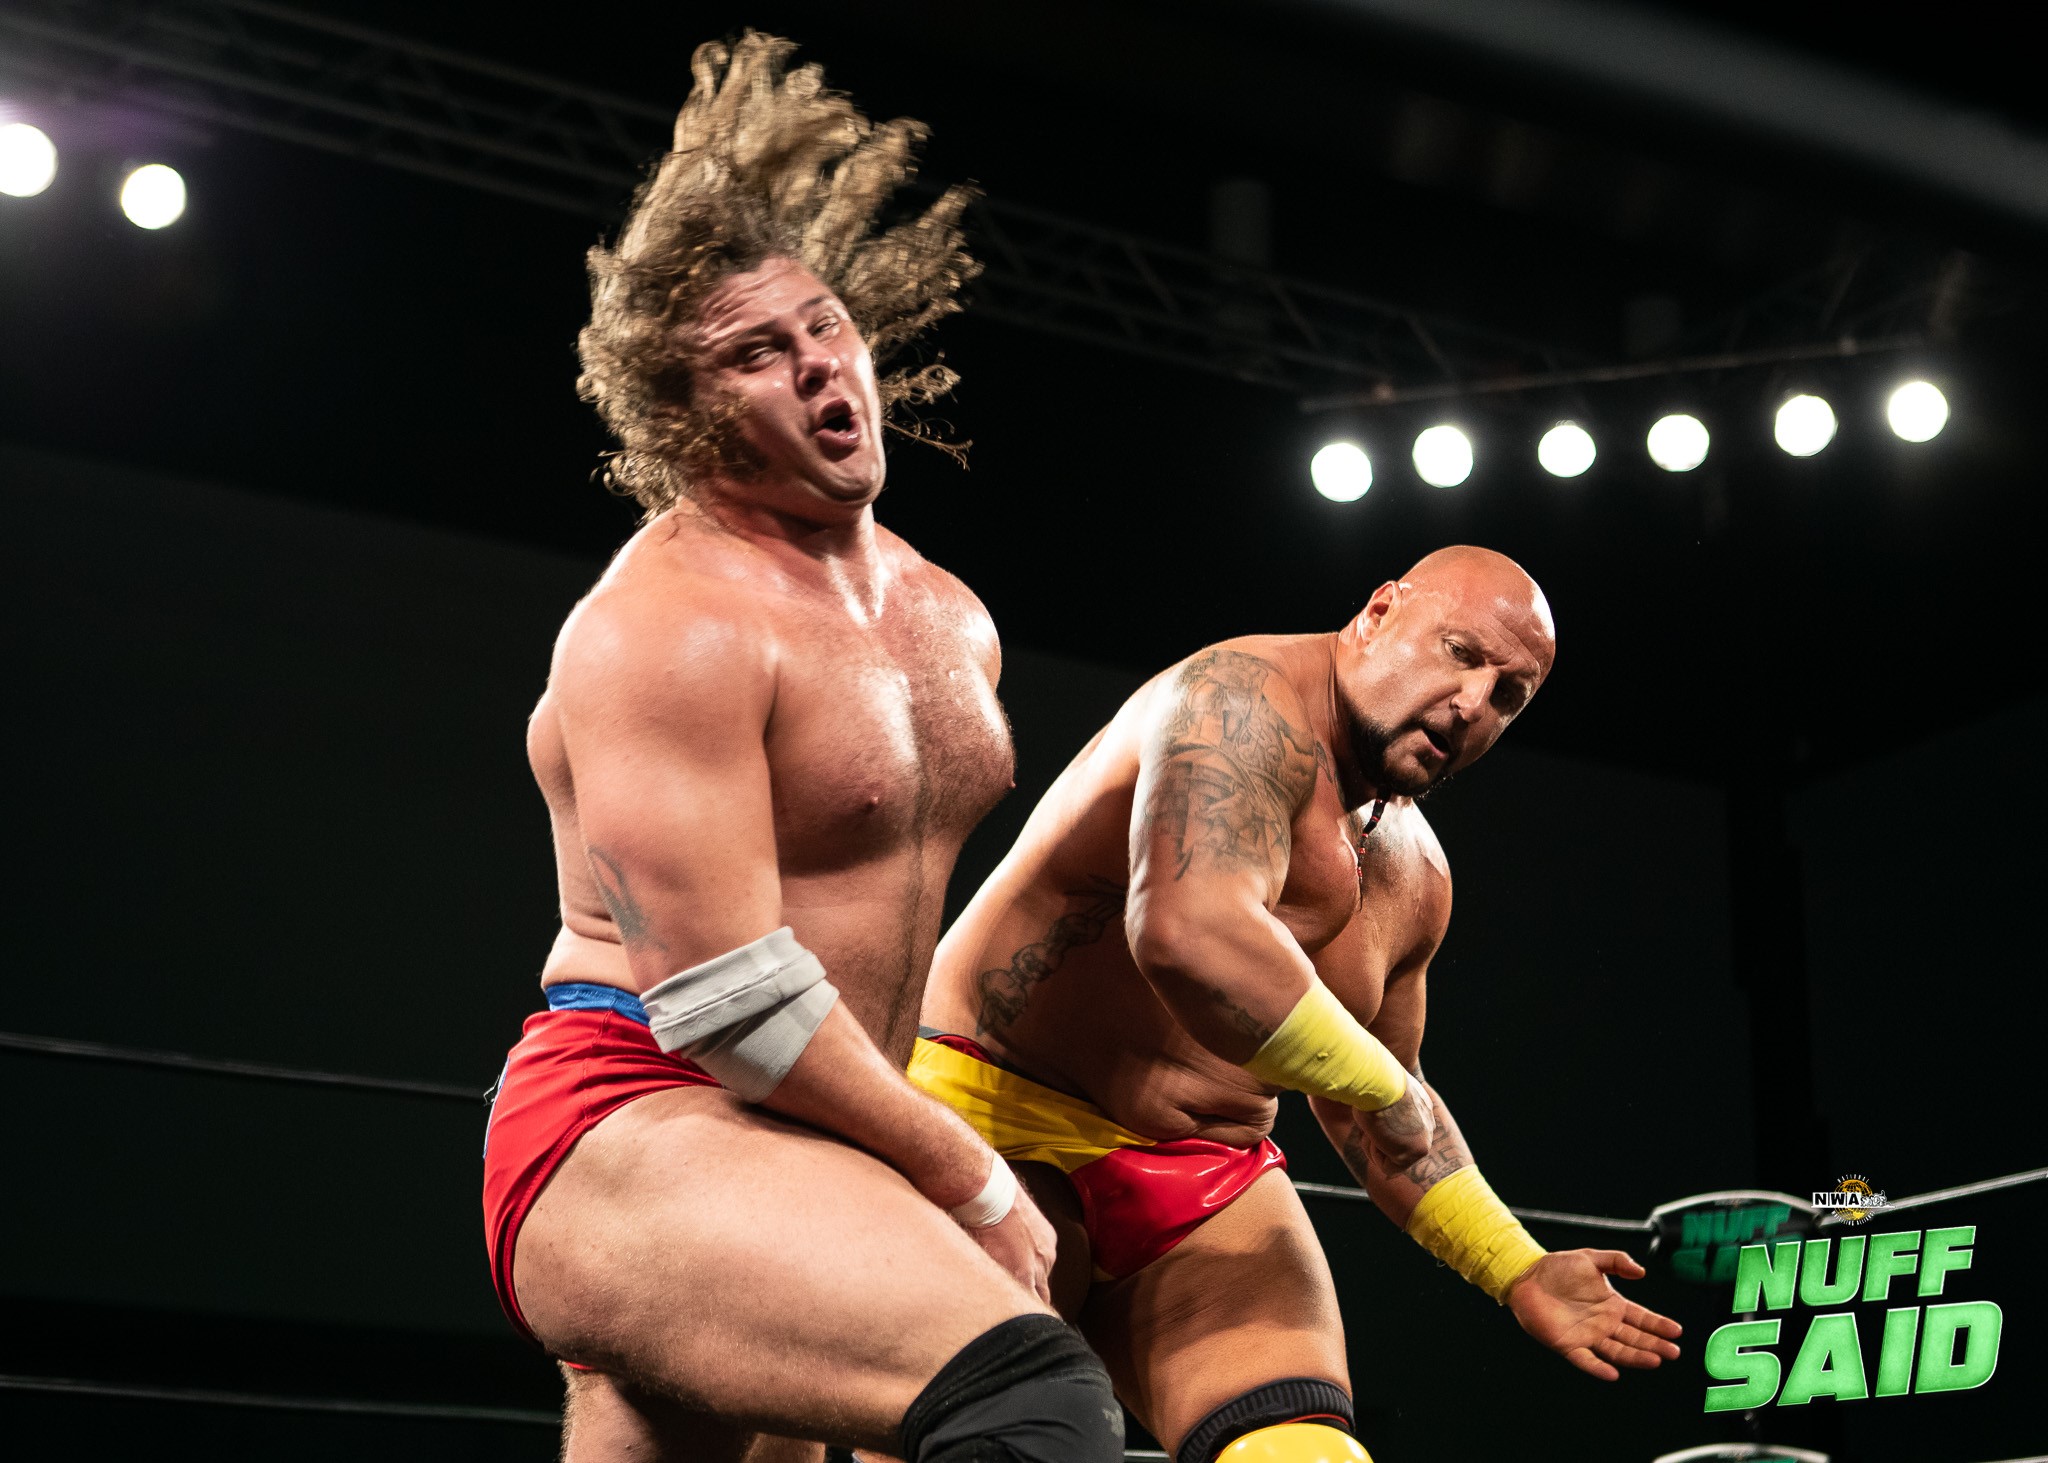 Brian Pillman Jr.: Interview with MLW wrestler, son of Brian Pillman -  Sports Illustrated